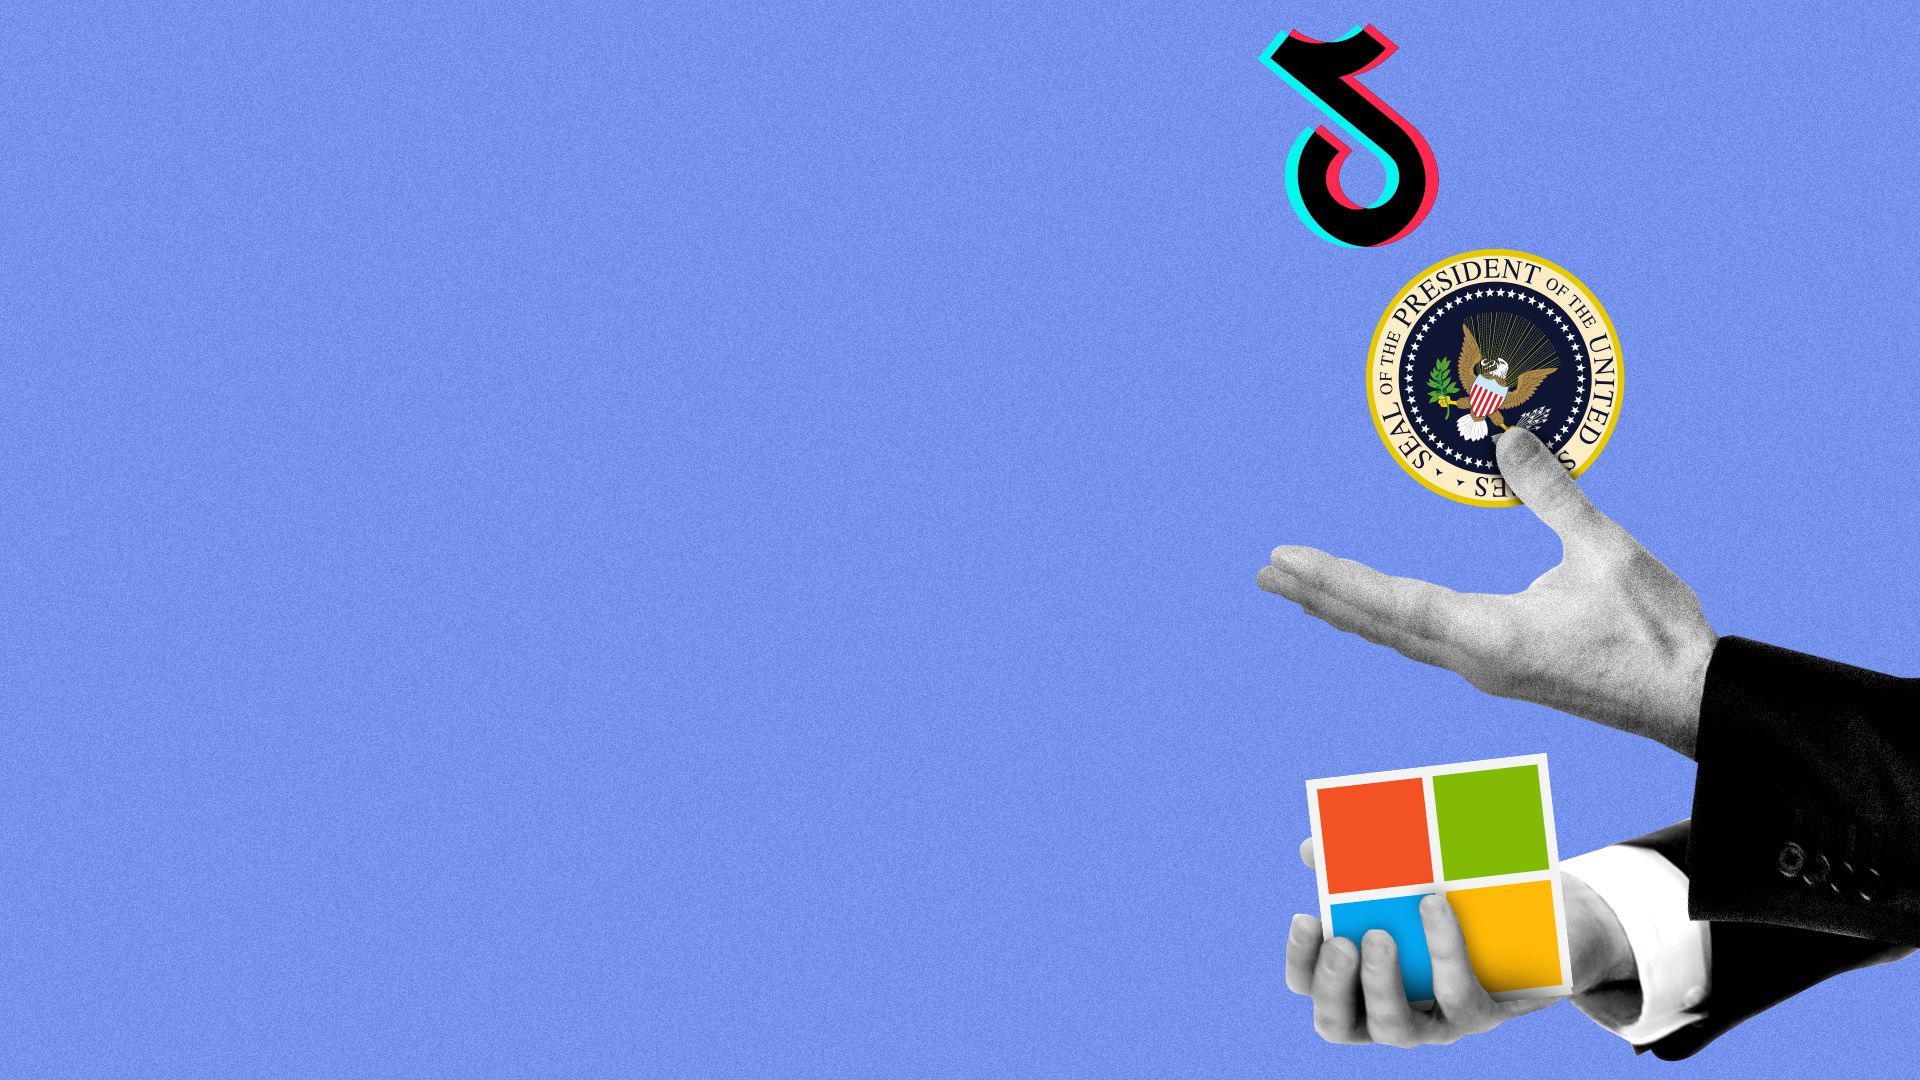 Illustration of hands juggling the Tik Tok logo, the Microsoft logo and the presidential seal.   